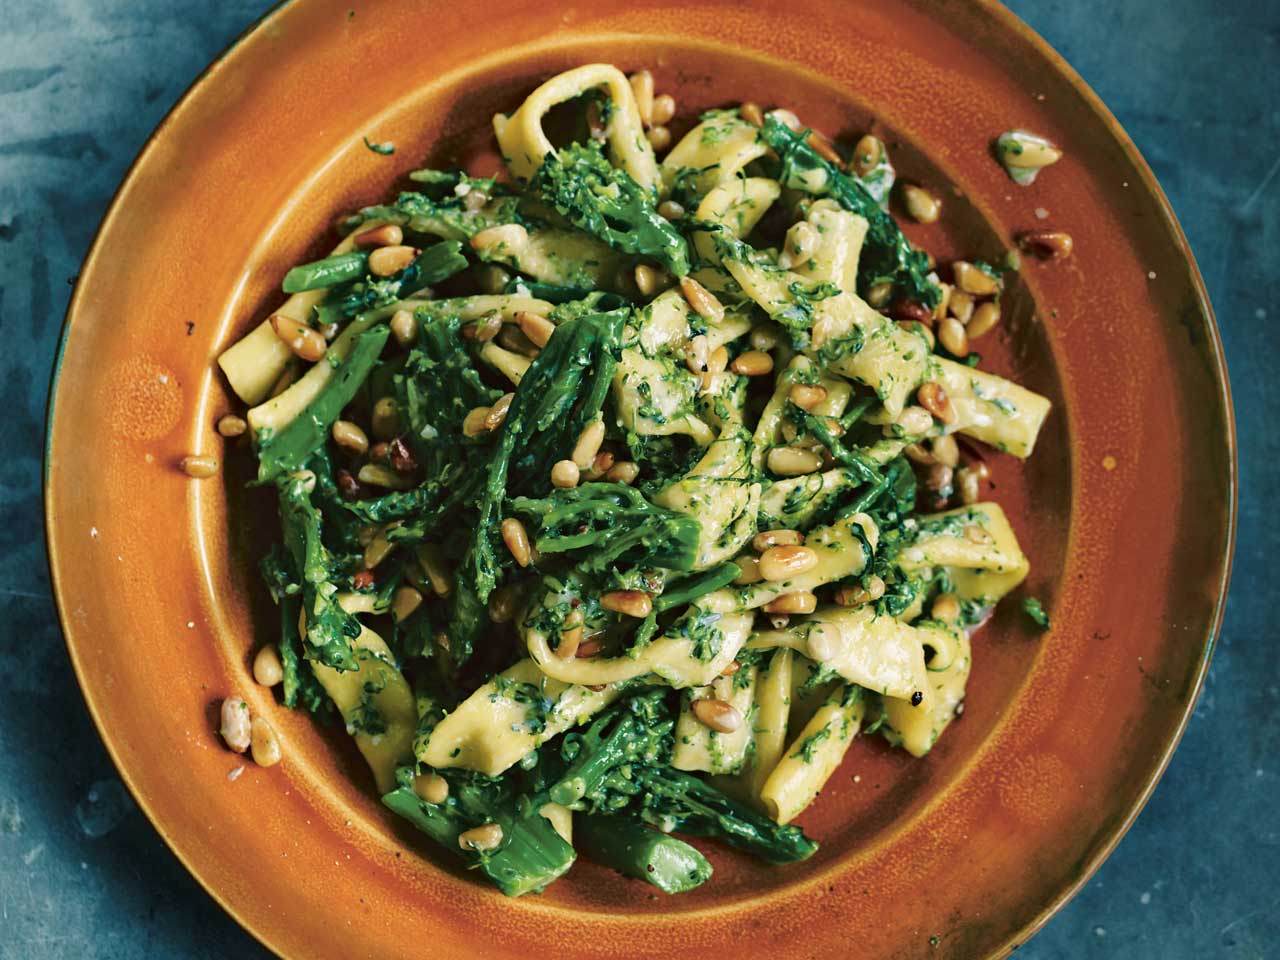 Ziti with broccoli and toasted pine nuts